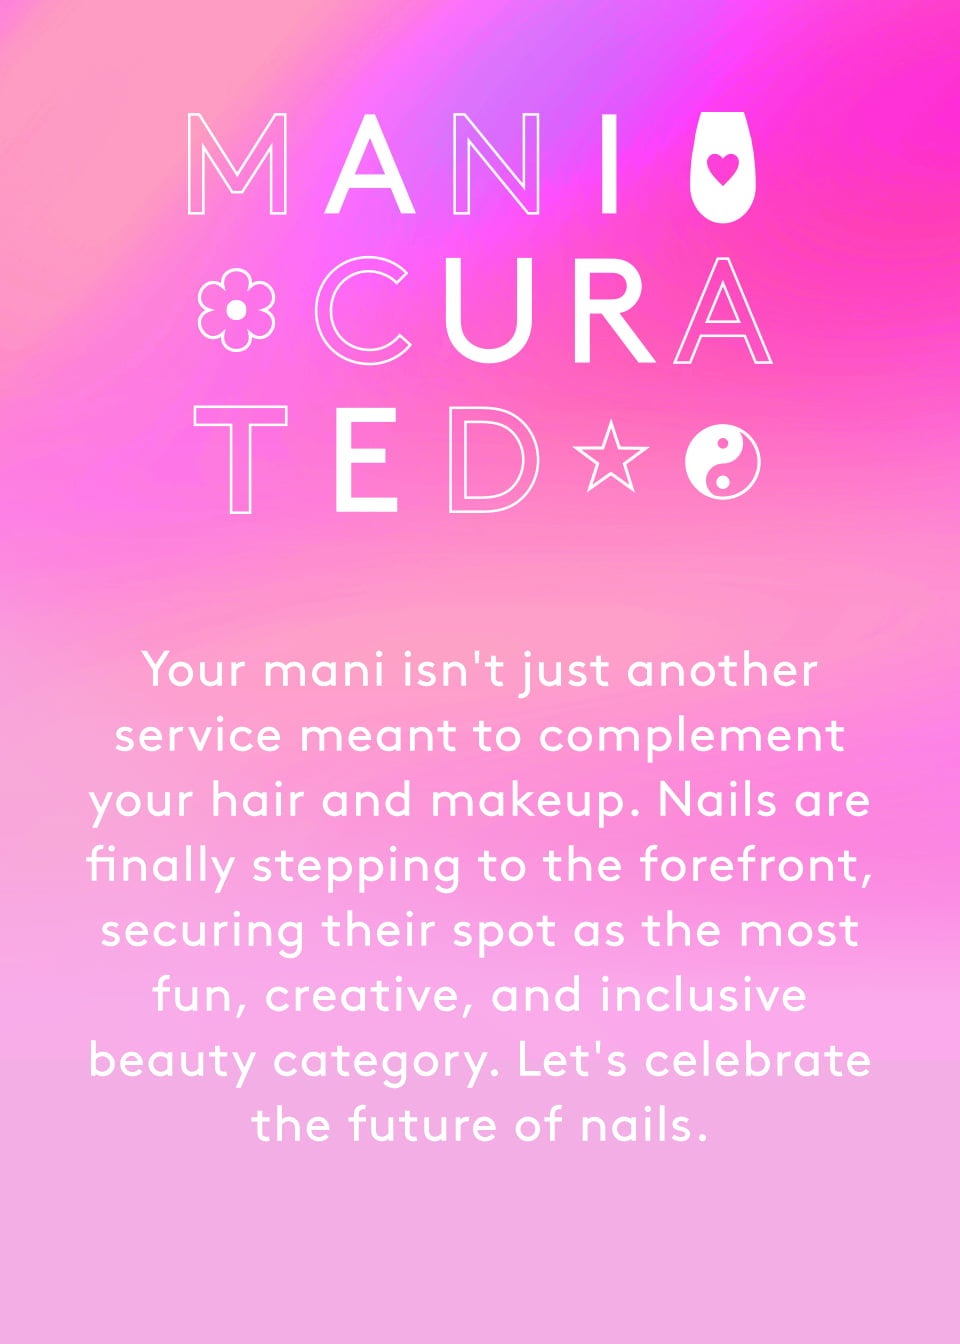 Your mani isn't just another service meant to complement your hair and makeup. Nails are finally stepping to the forefront, securing their spot as the most fun, creative, and inclusive beauty category. Let's celebrate the future of nails.